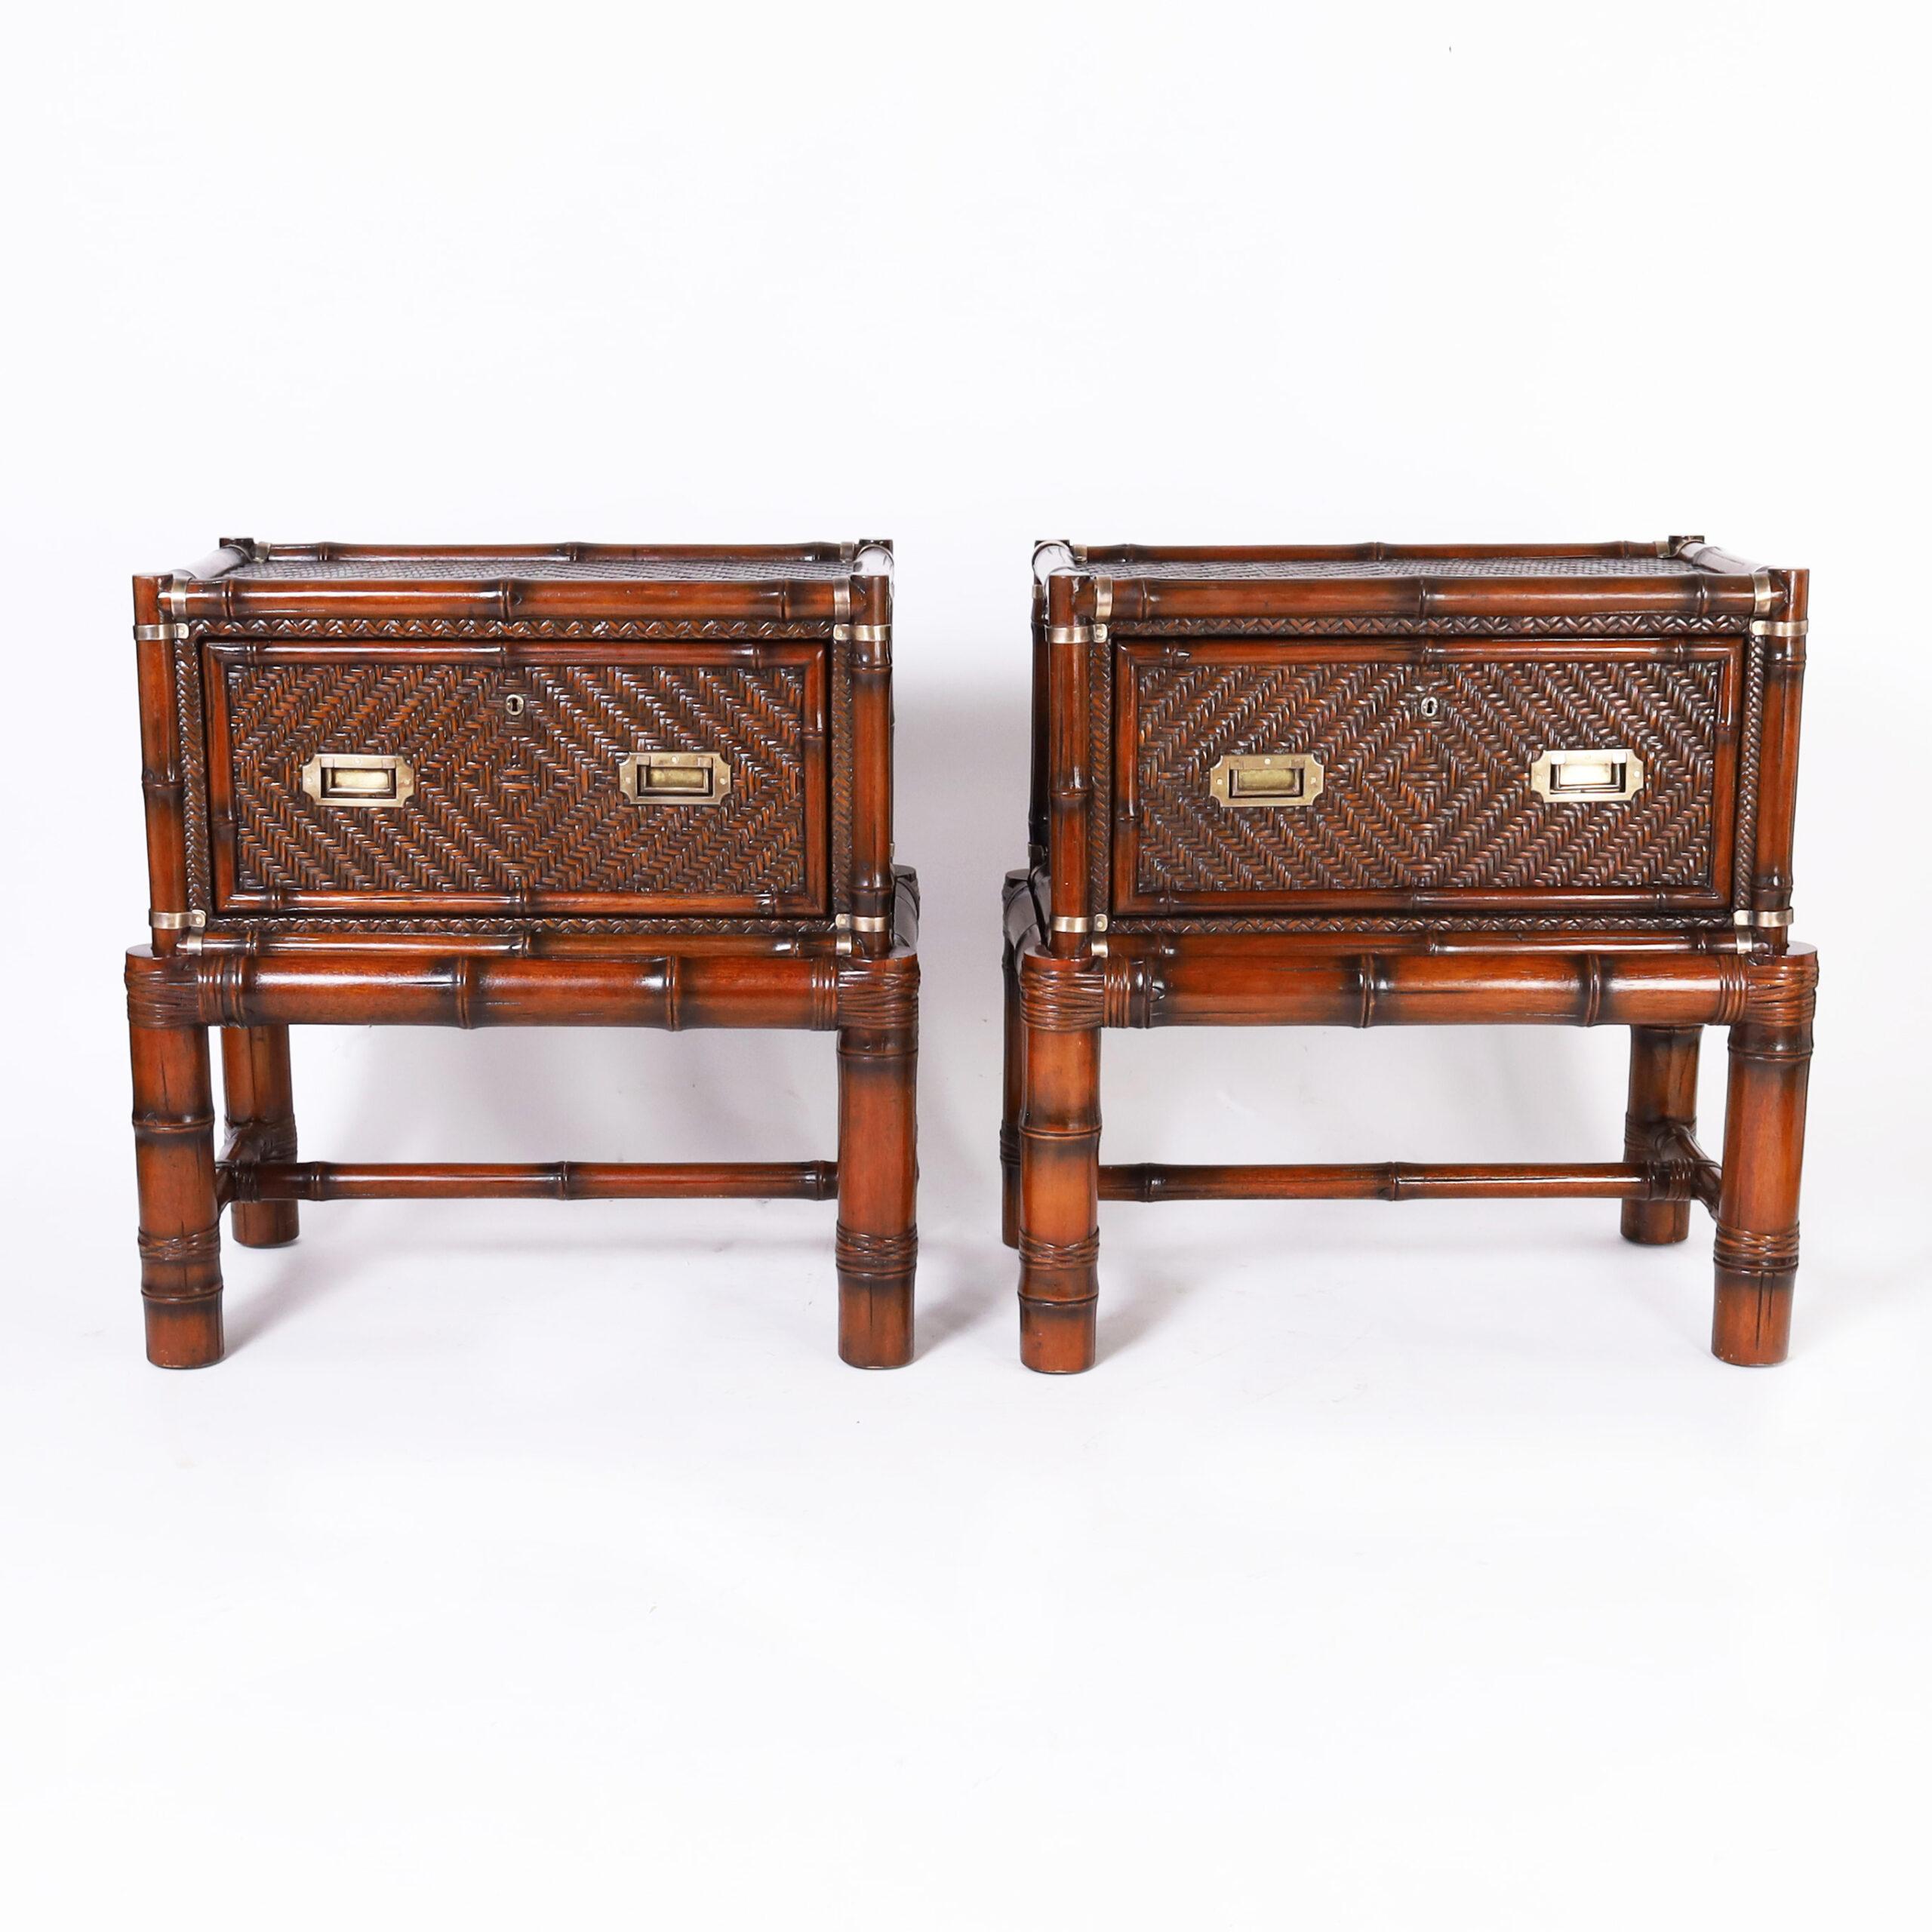 Standout pair of vintage British colonial style one drawer stands crafted in a two piece construction, having a case with a bamboo frame, herringbone woven rattan panels, and campaign style brass hardware on a bamboo base with reed wrapped joints.